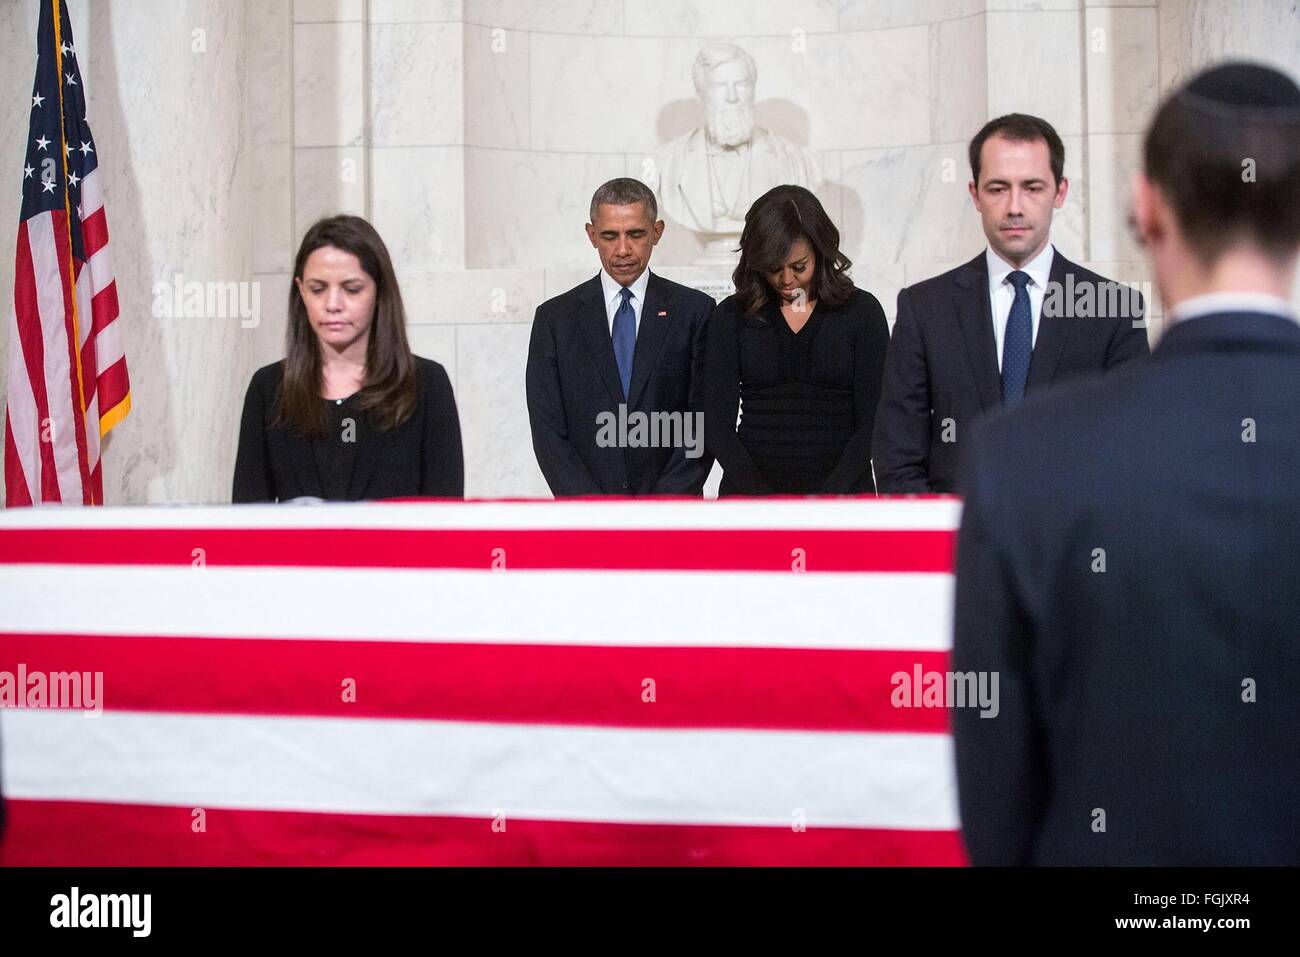 U.S. President Barack Obama and First Lady Michelle Obama pay respect beside the flag draped casket of Supreme Court Justice Antonin Scalia at the Great Hall of the Supreme Court February 17, 2016 in Washington, DC. Scalia died at age 79, during a hunting trip in West Texas. Stock Photo